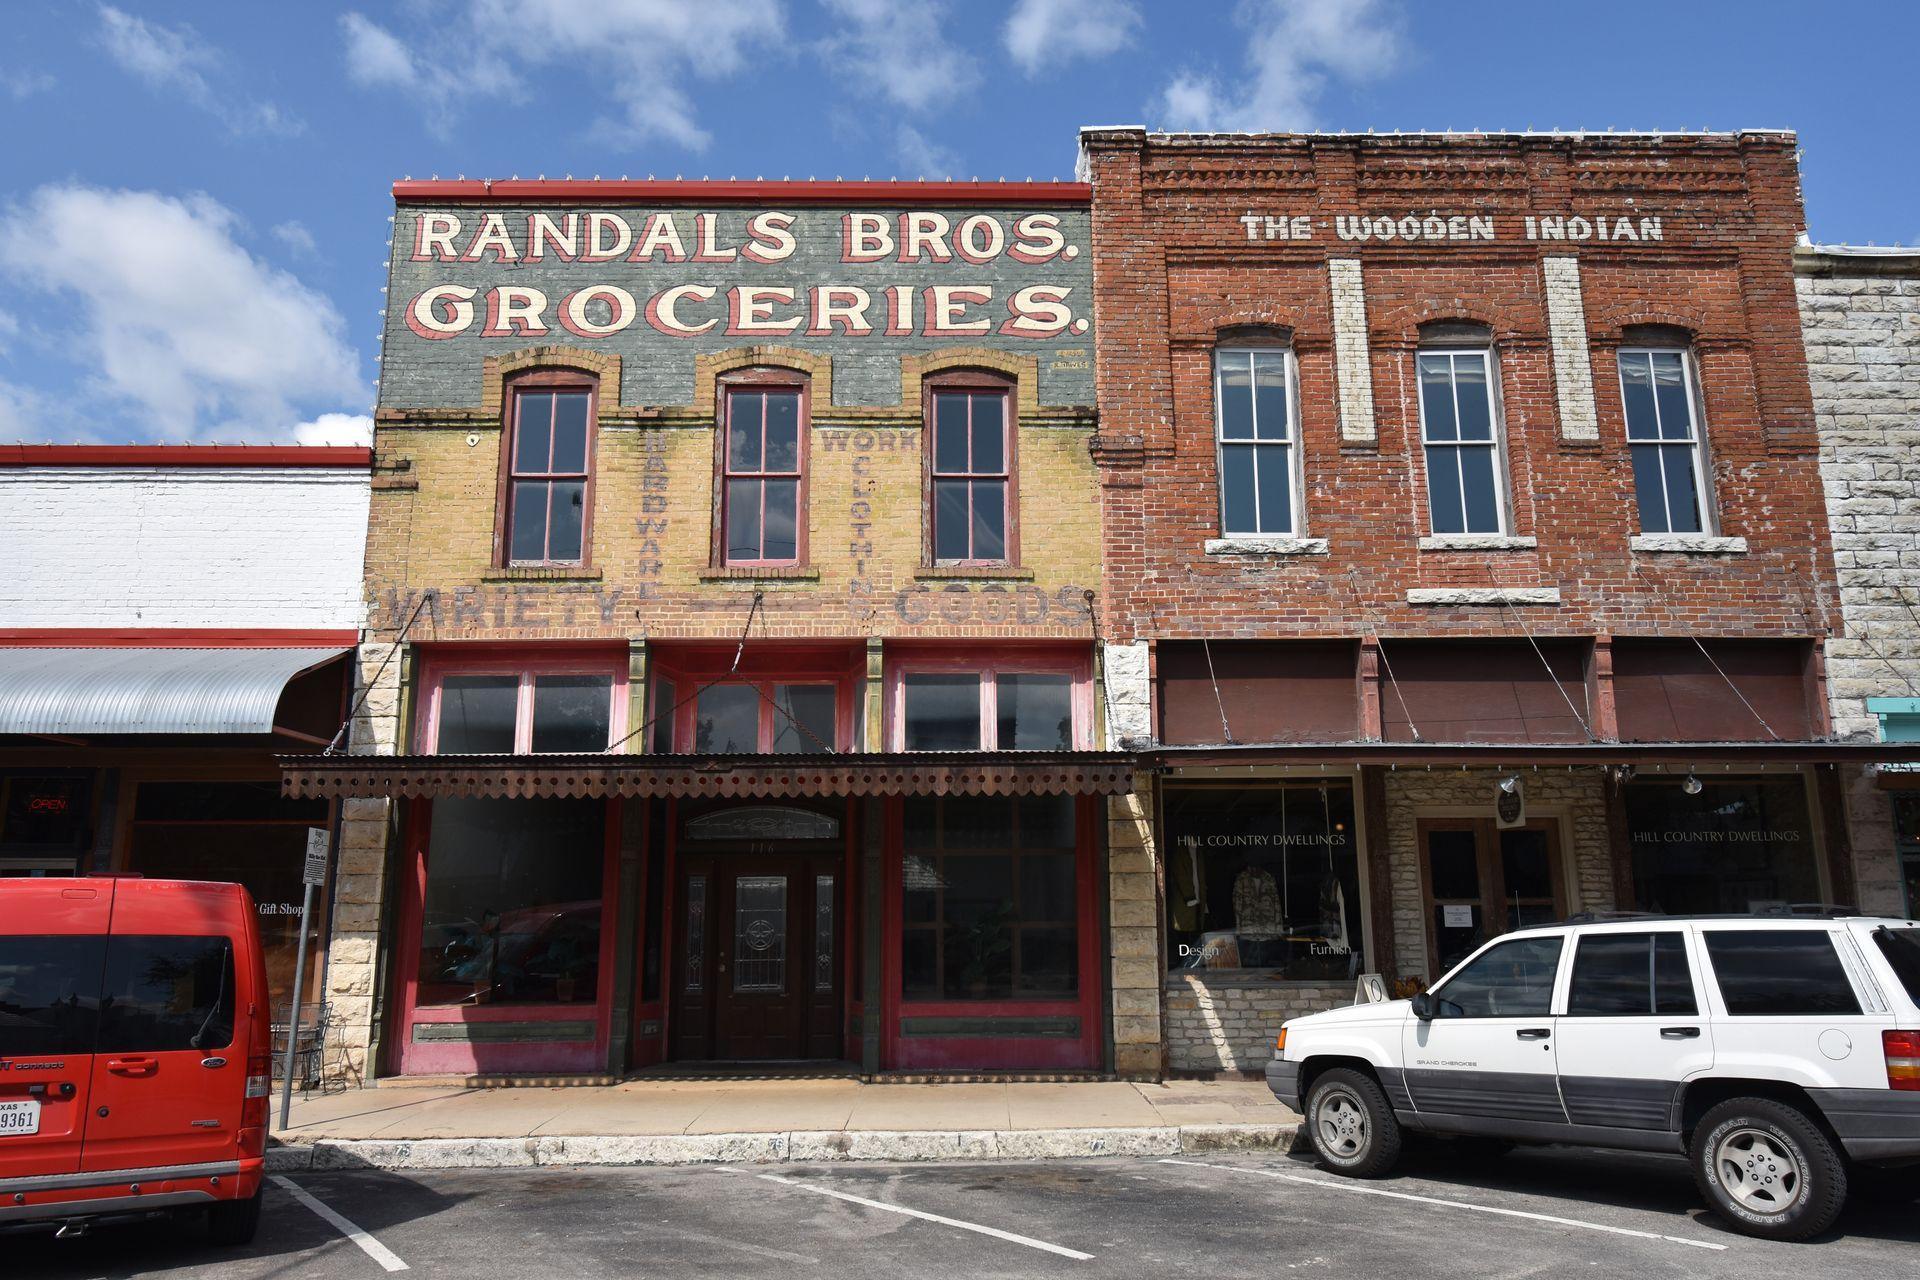 An exterior of two buildings in Hico that are brick and vintage looking. One reads "Randal Bros Groceries"